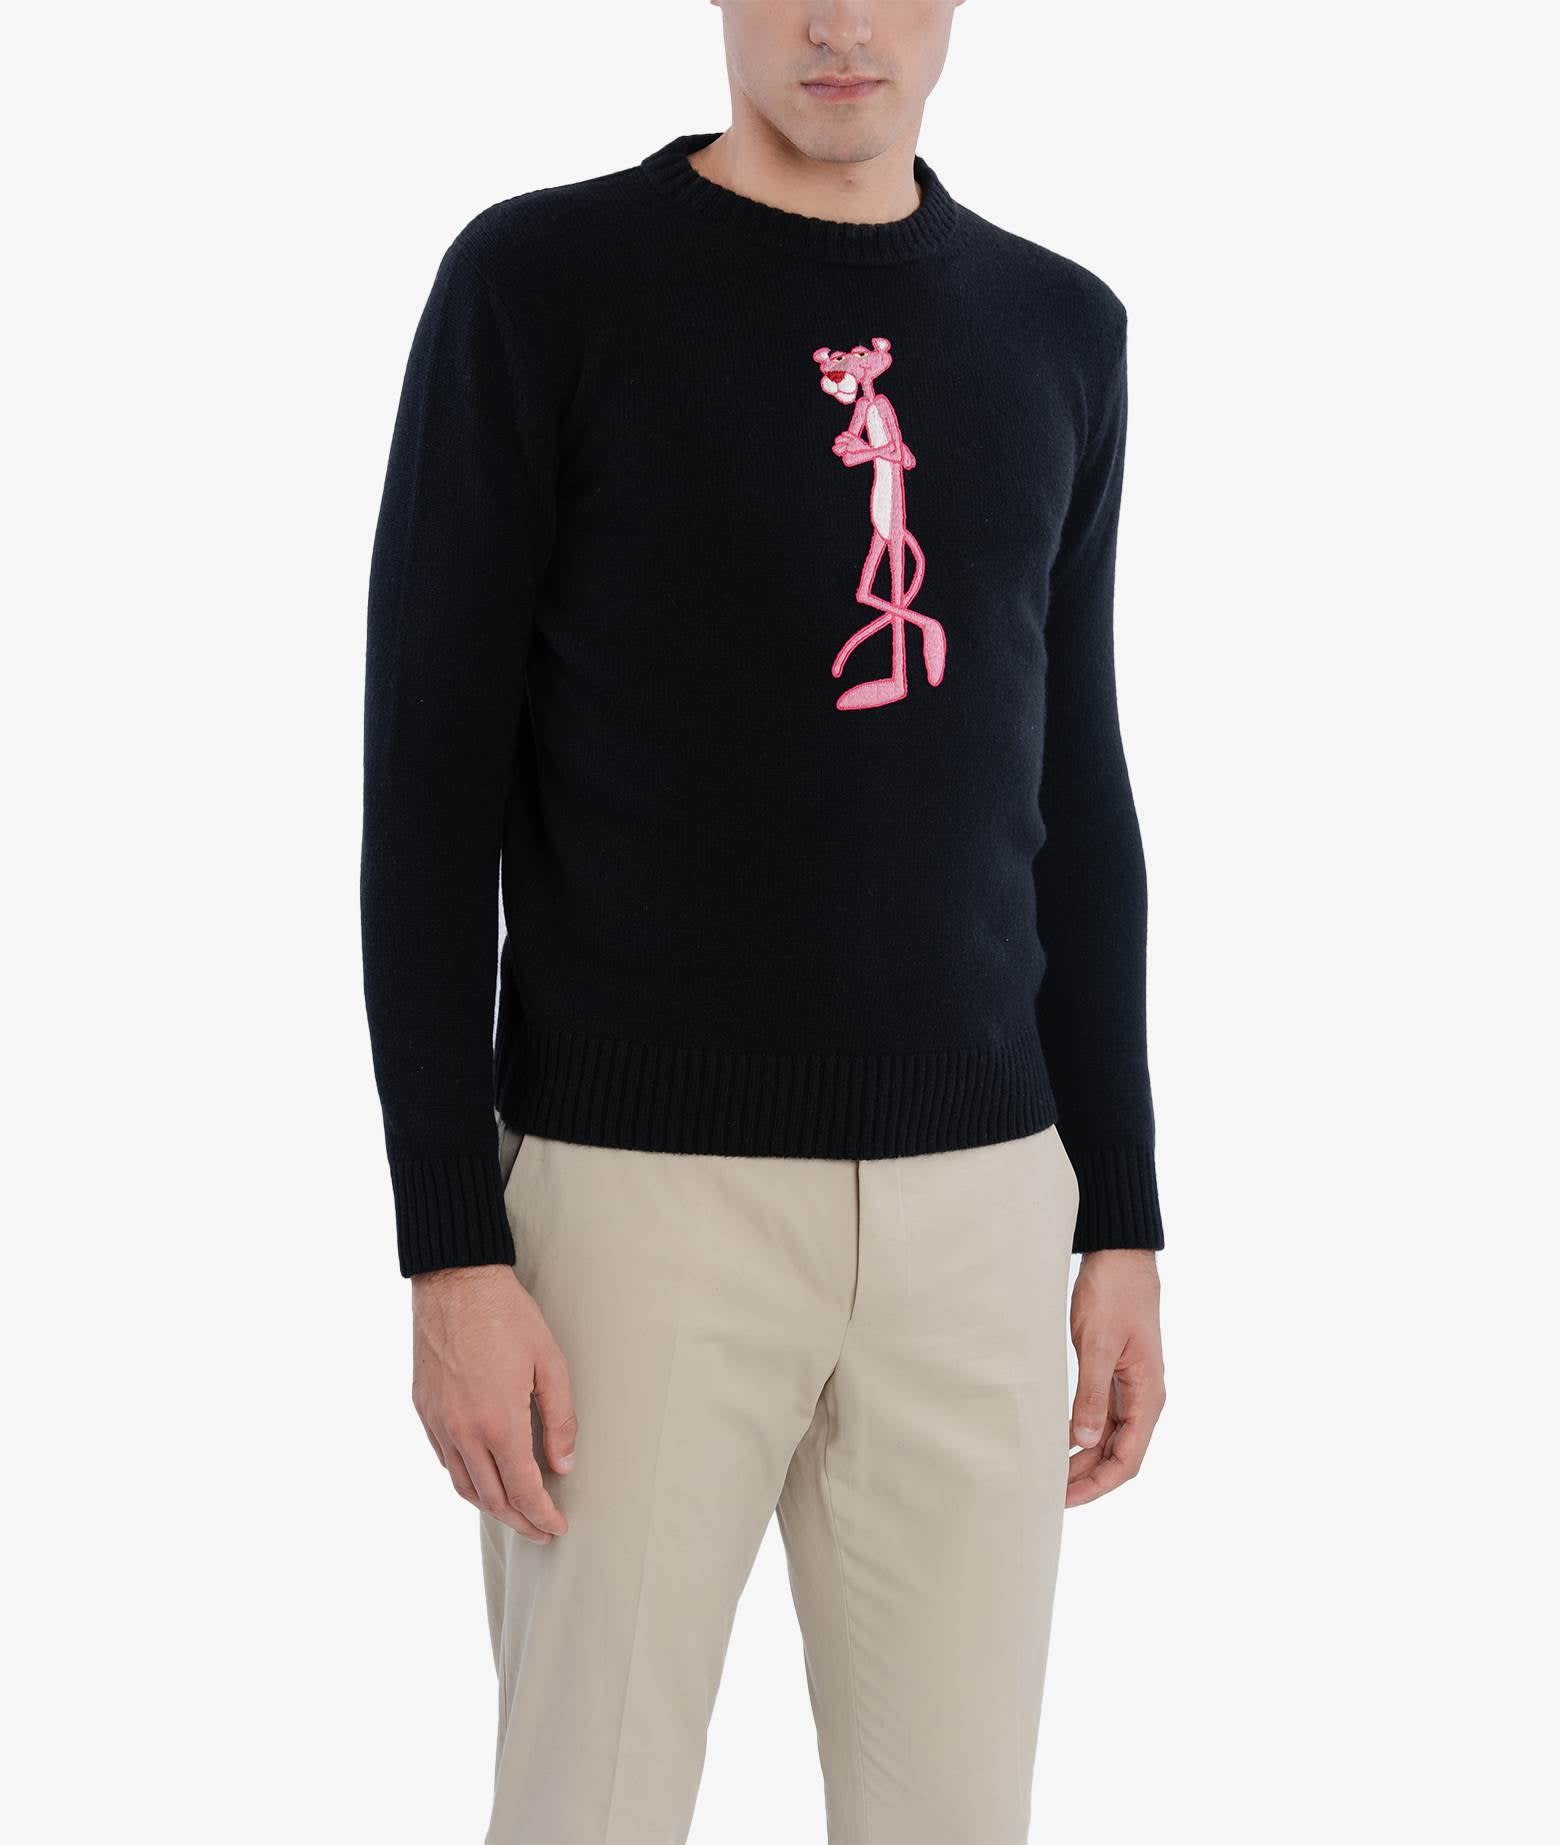 Shop Larusmiani Sweater Pink Panther Sweater In Black